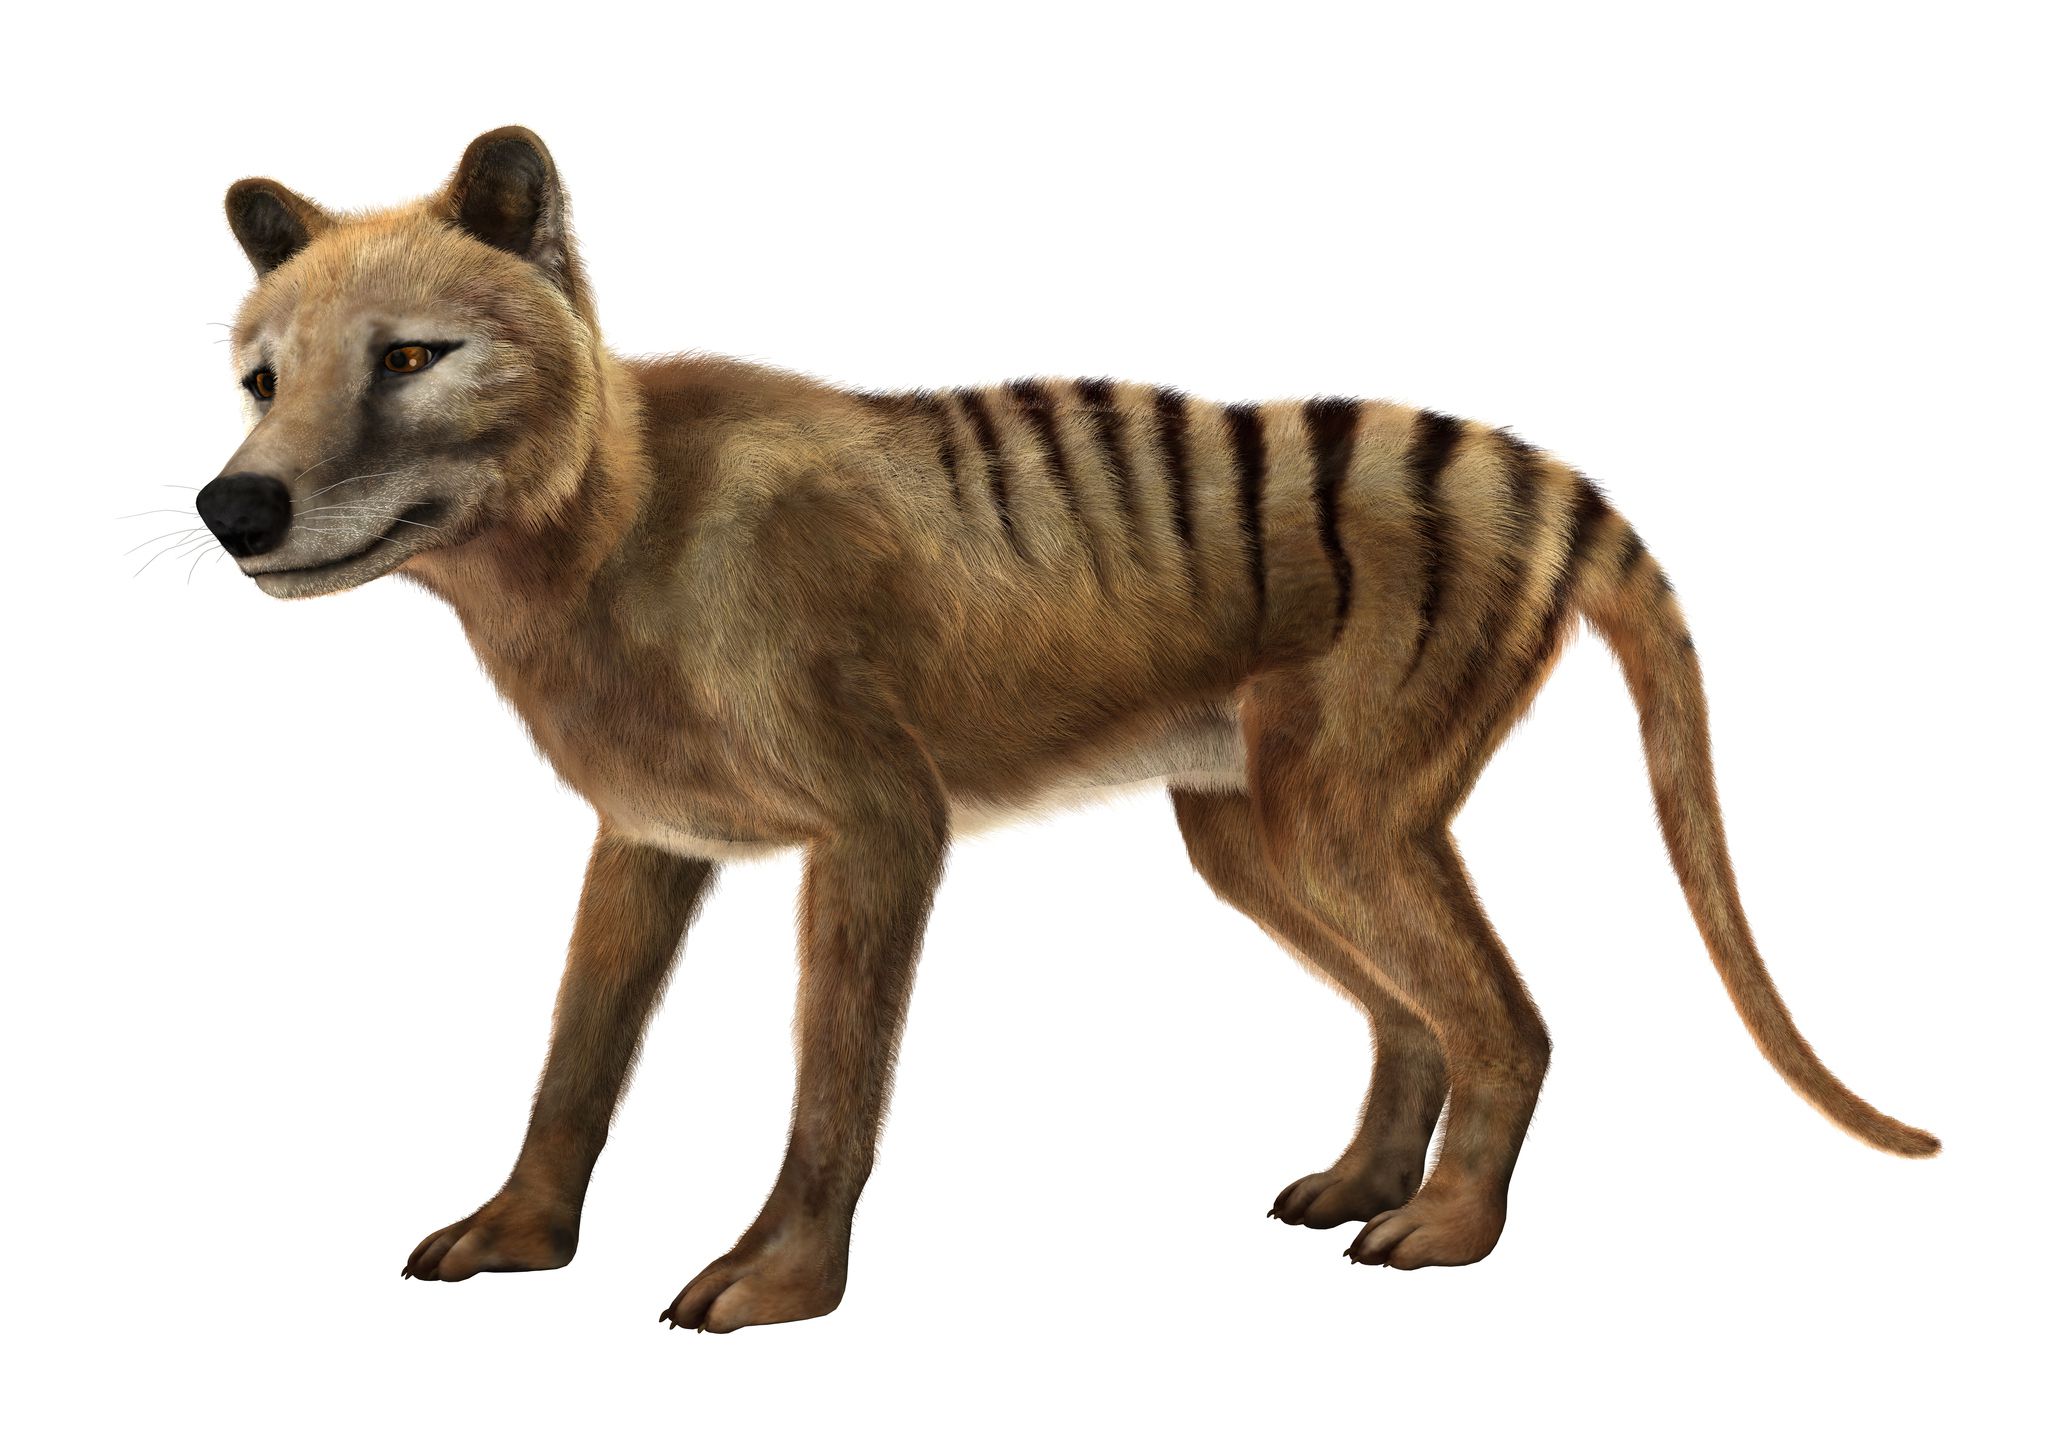 <p>Also known as the thylacine, the Tasmanian Tiger, was <a href="https://www.nma.gov.au/defining-moments/resources/extinction-of-thylacine">declared extinct in 1936</a>. Intensive hunting, which were sometimes <a href="https://digital-classroom.nma.gov.au/defining-moments/extinction-thylacine">encouraged by bounties</a>, are thought to have decimated their population in their native Australia. Habitat destruction and competition with introduced species like dogs and wolves further contributed to their decline. The extinction of this majestic animal serves as an example of the devastating impact of human actions on native species.</p>